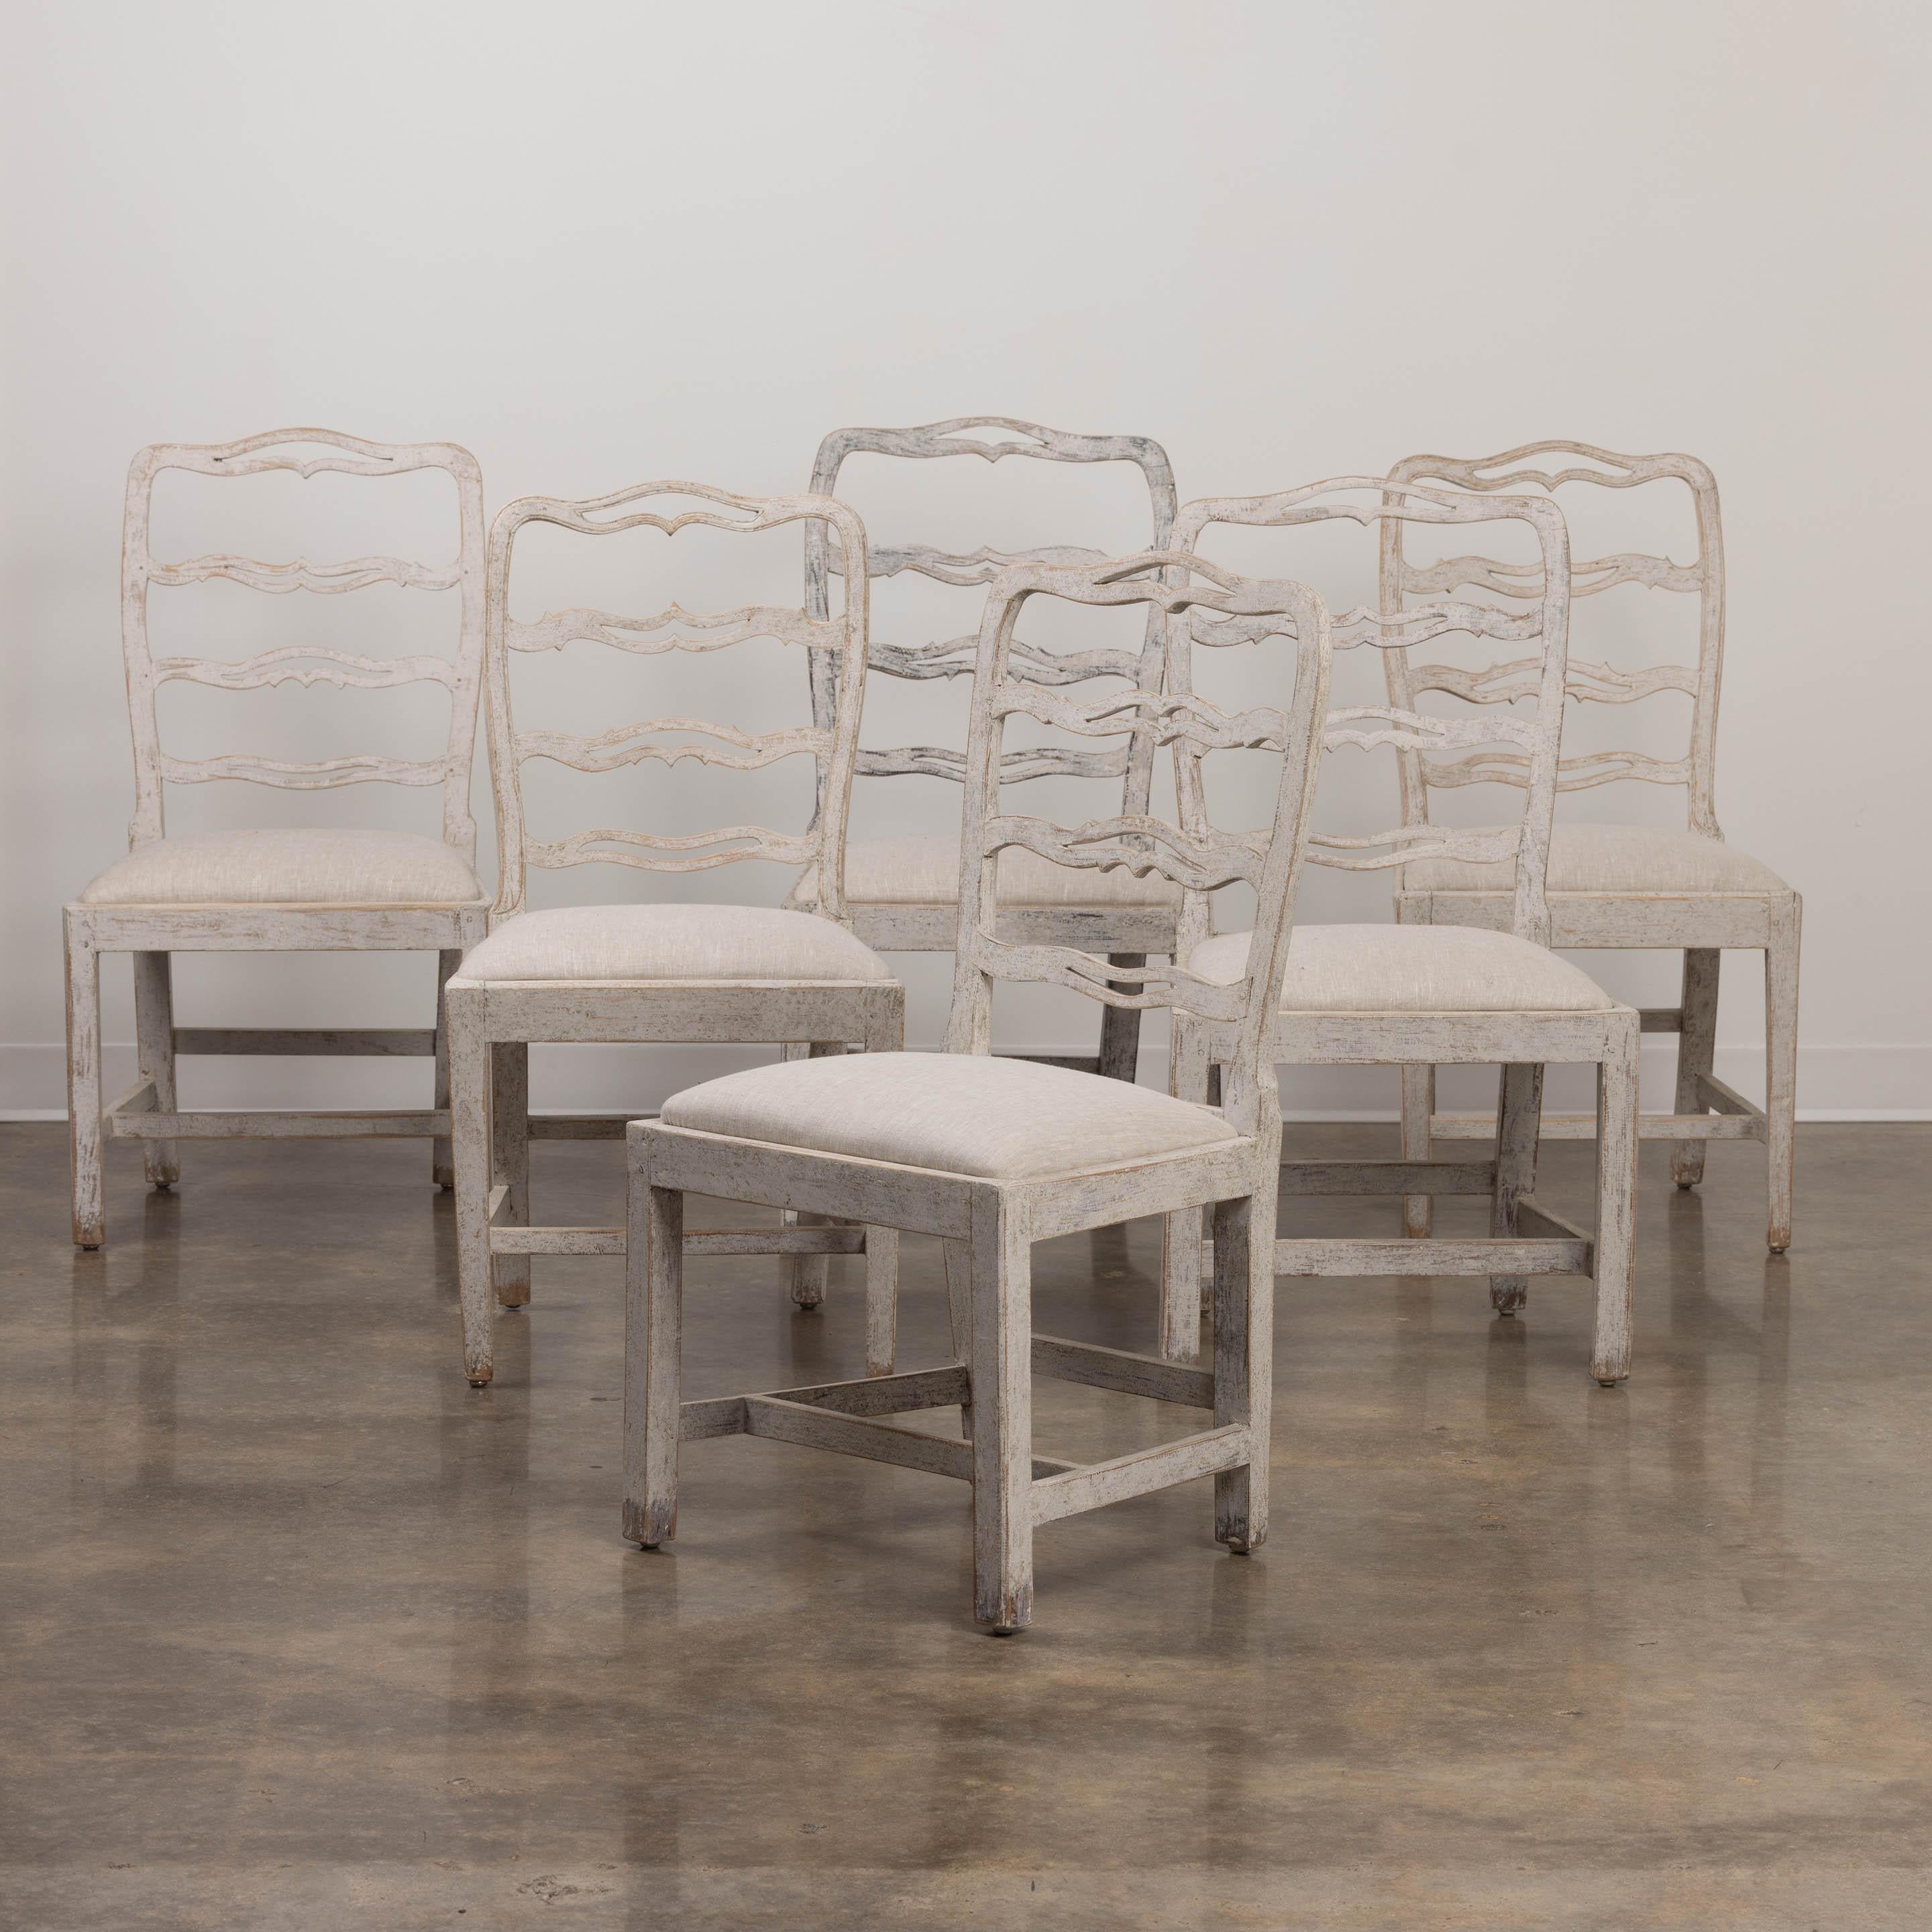 A matched set of 5 Swedish Gustavian period painted dining chairs from the 19th century, newly upholstered in linen with carved and pierced ladder backs and slip seats. This is an exquisite set of chairs.
The Gustavian style, named after King Gustav